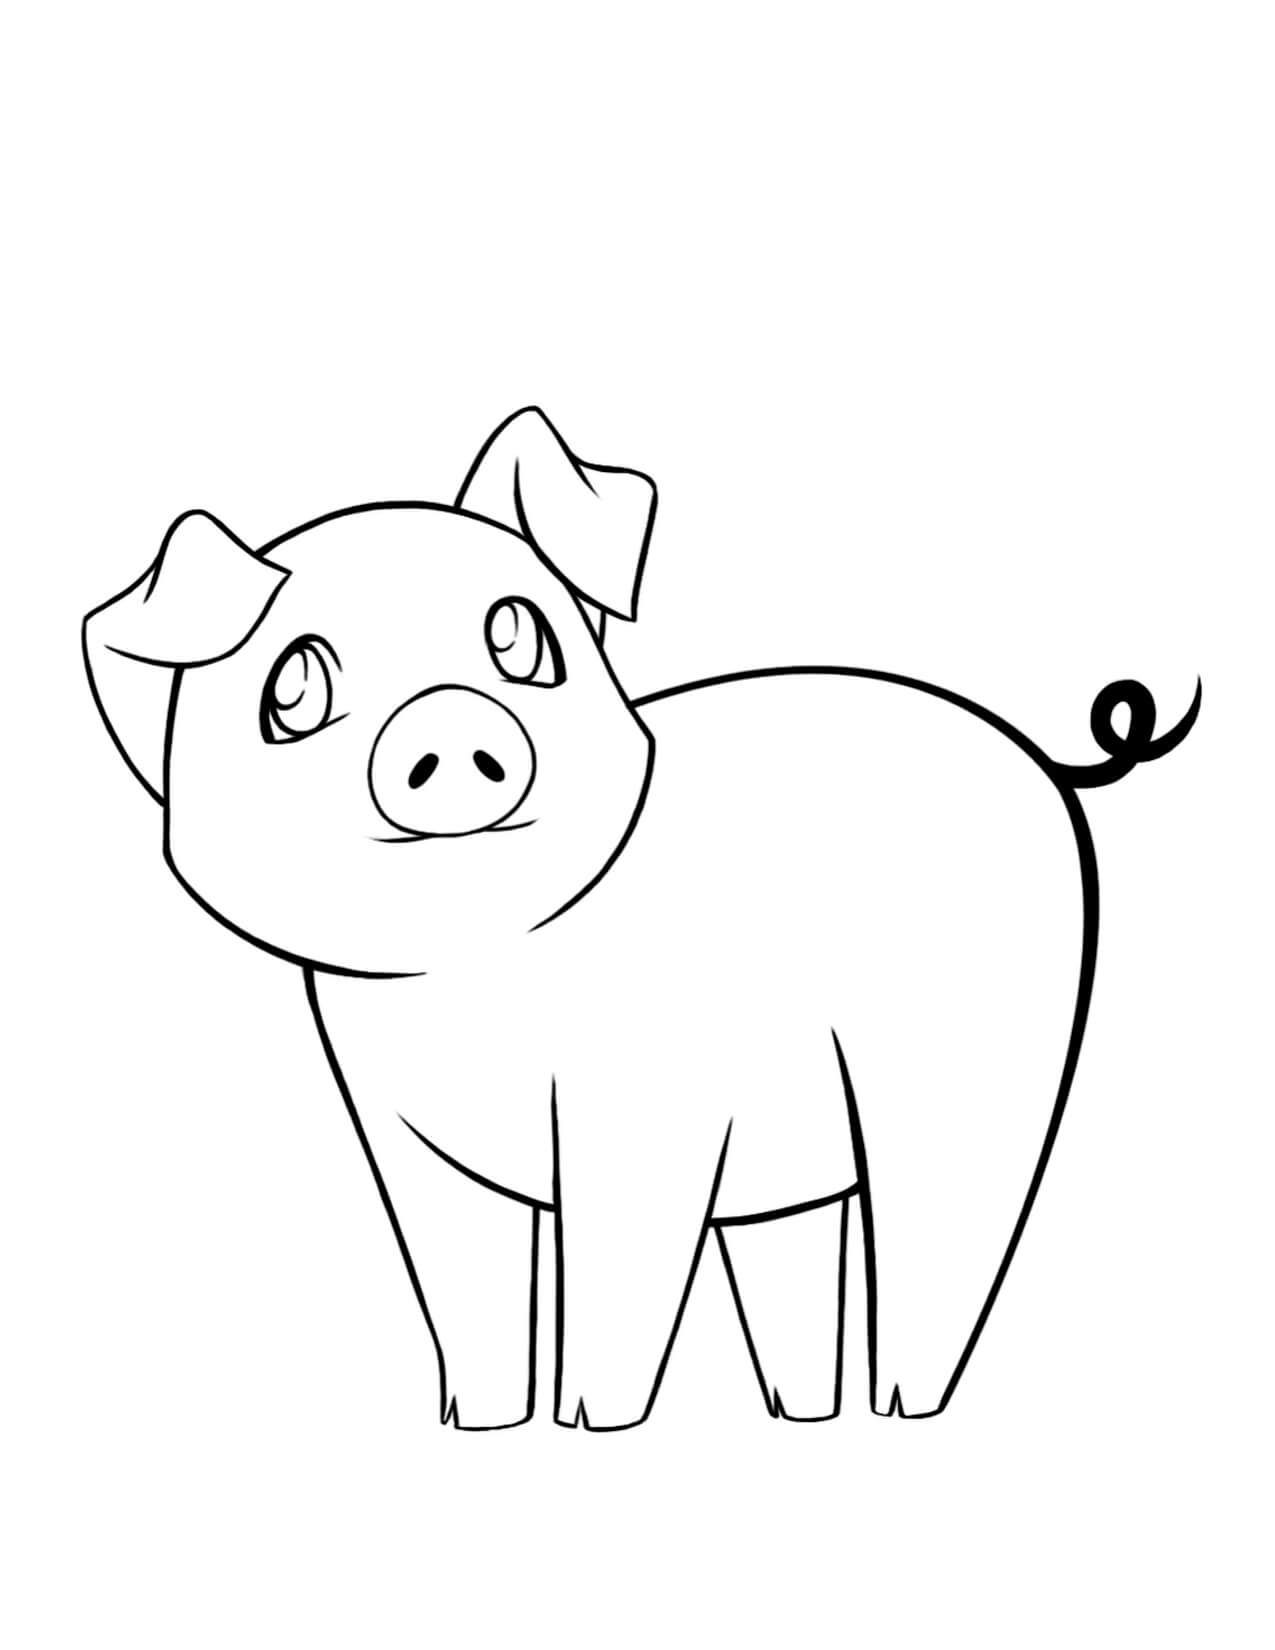 Sweet Pig Coloring Pages